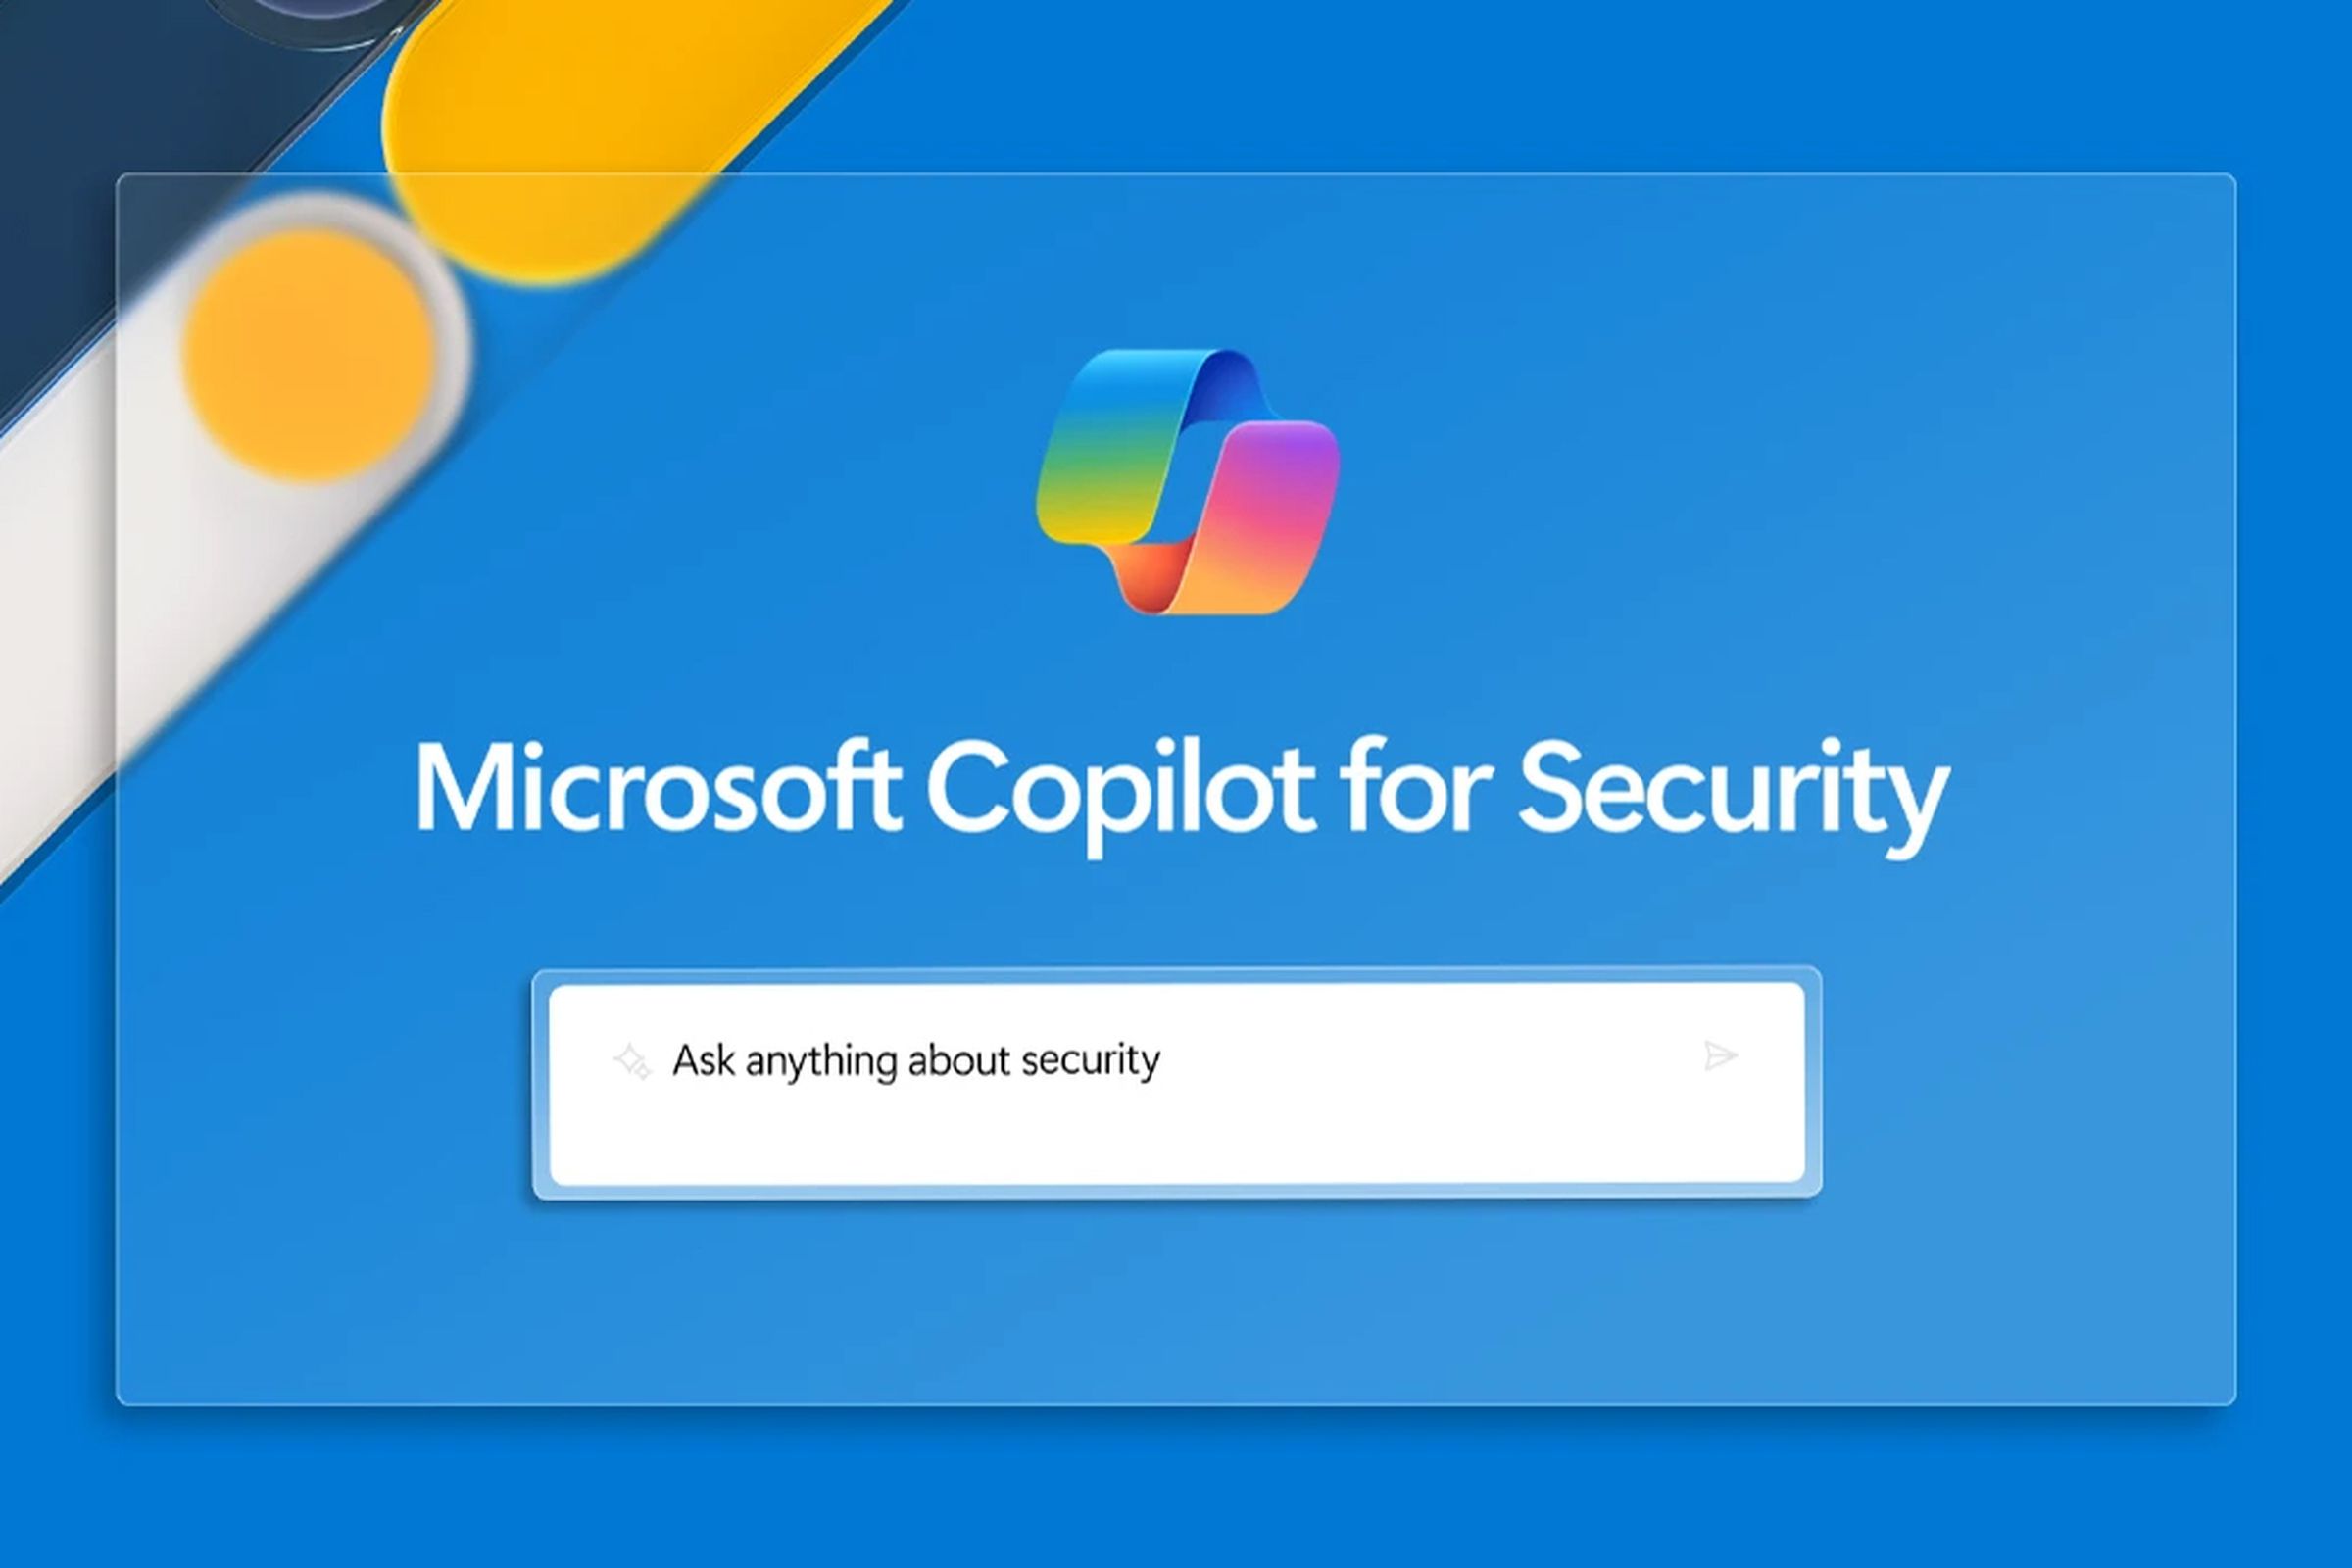 Illustration of Microsoft Copilot for Security